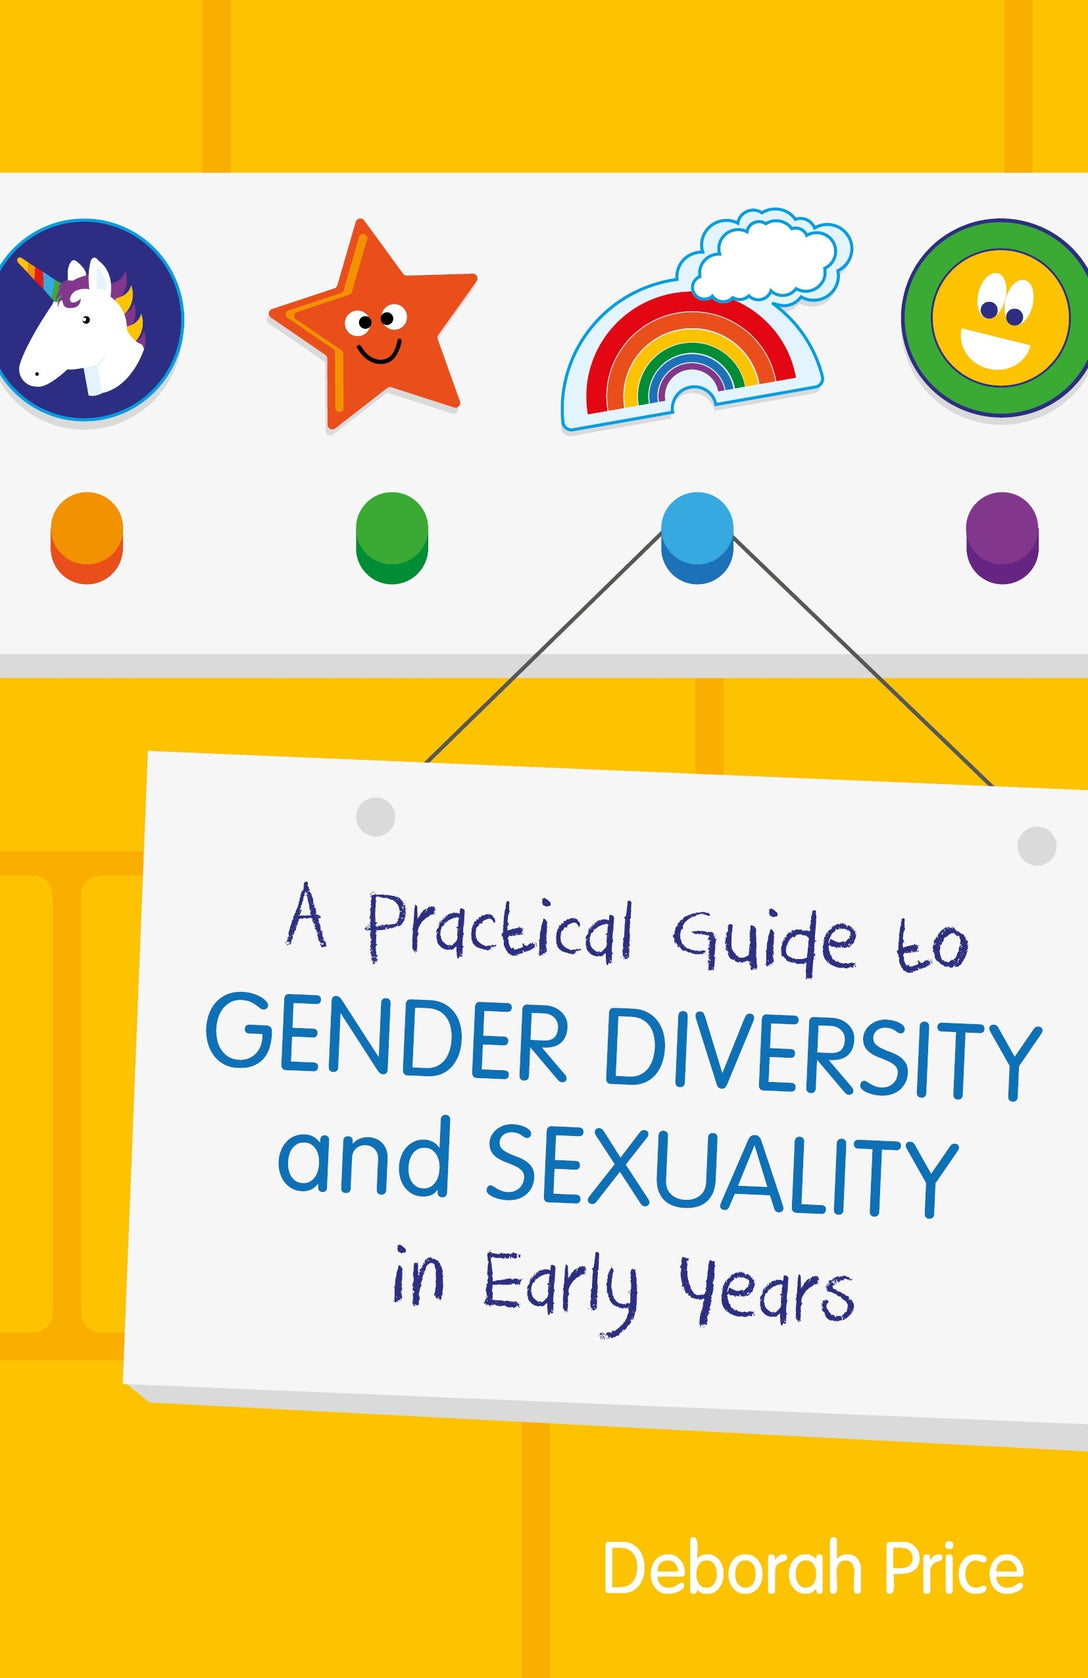 A Practical Guide to Gender Diversity and Sexuality in Early Years by Deborah Price